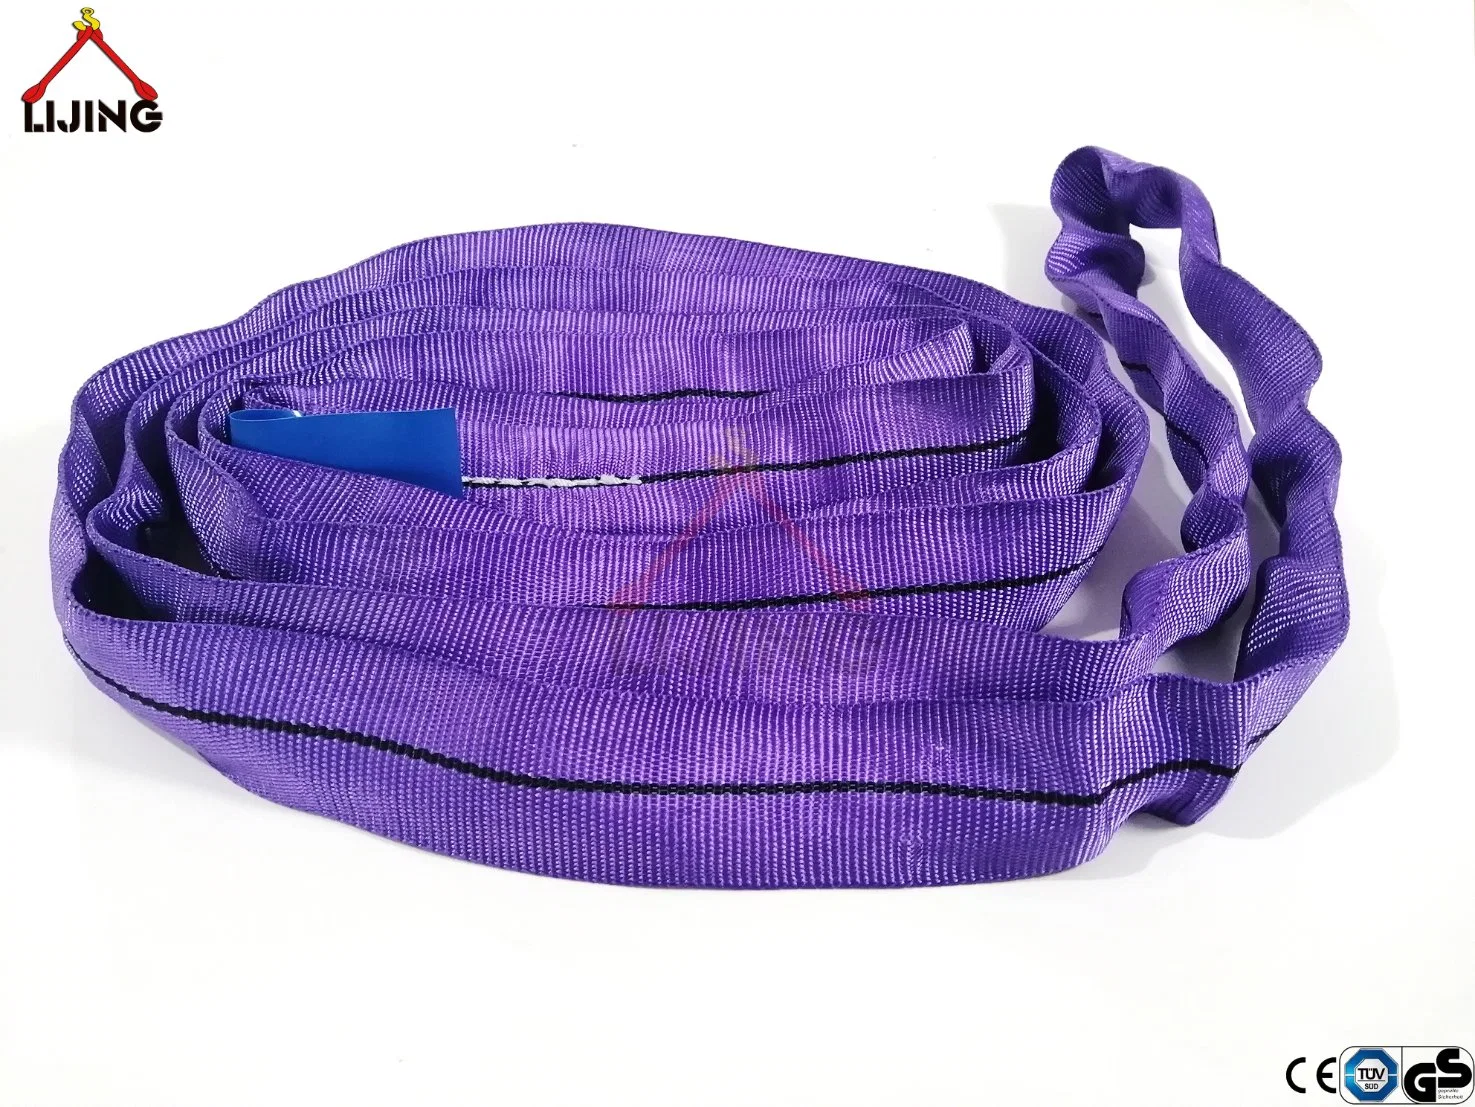 2m 1t 40mm Purple Polyester Lifting Endless Round Sling En1492-2: 2000